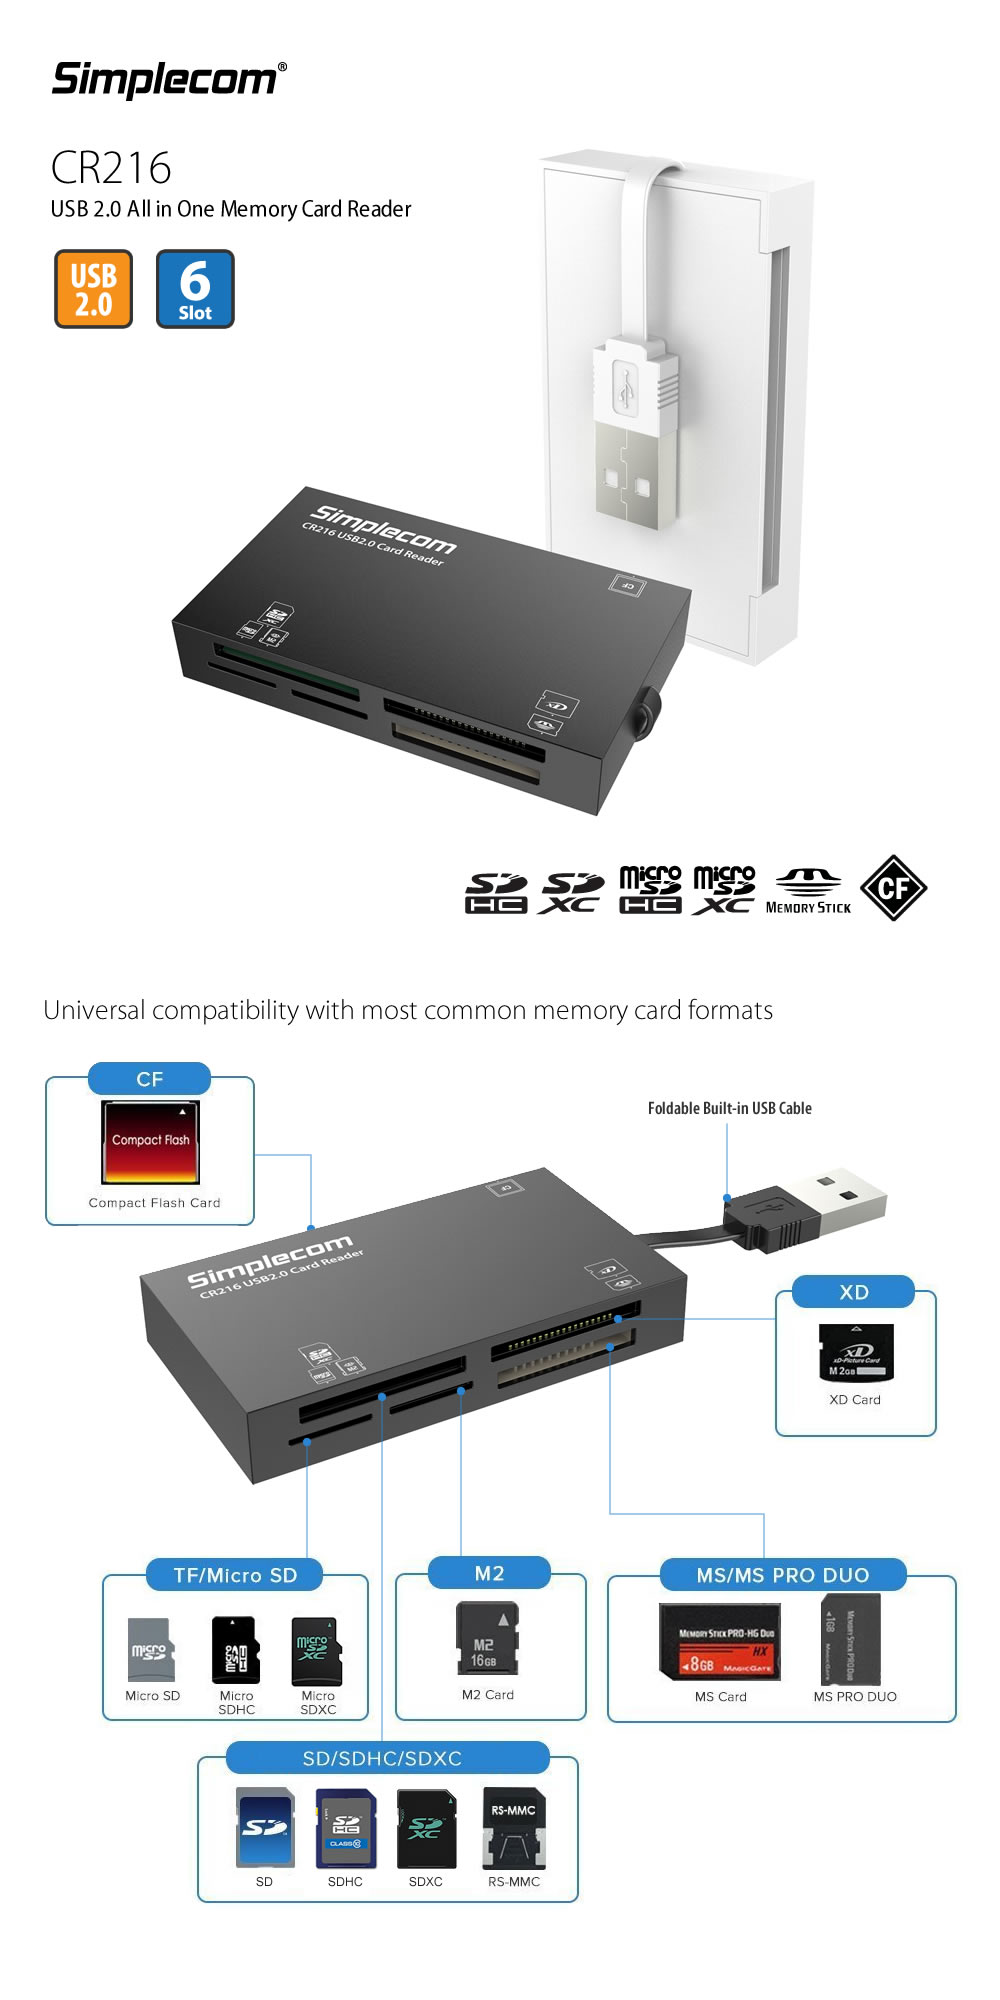 Simplecom Cr216 Usb 2.0 All In One Memory Card Reader 6 Slot